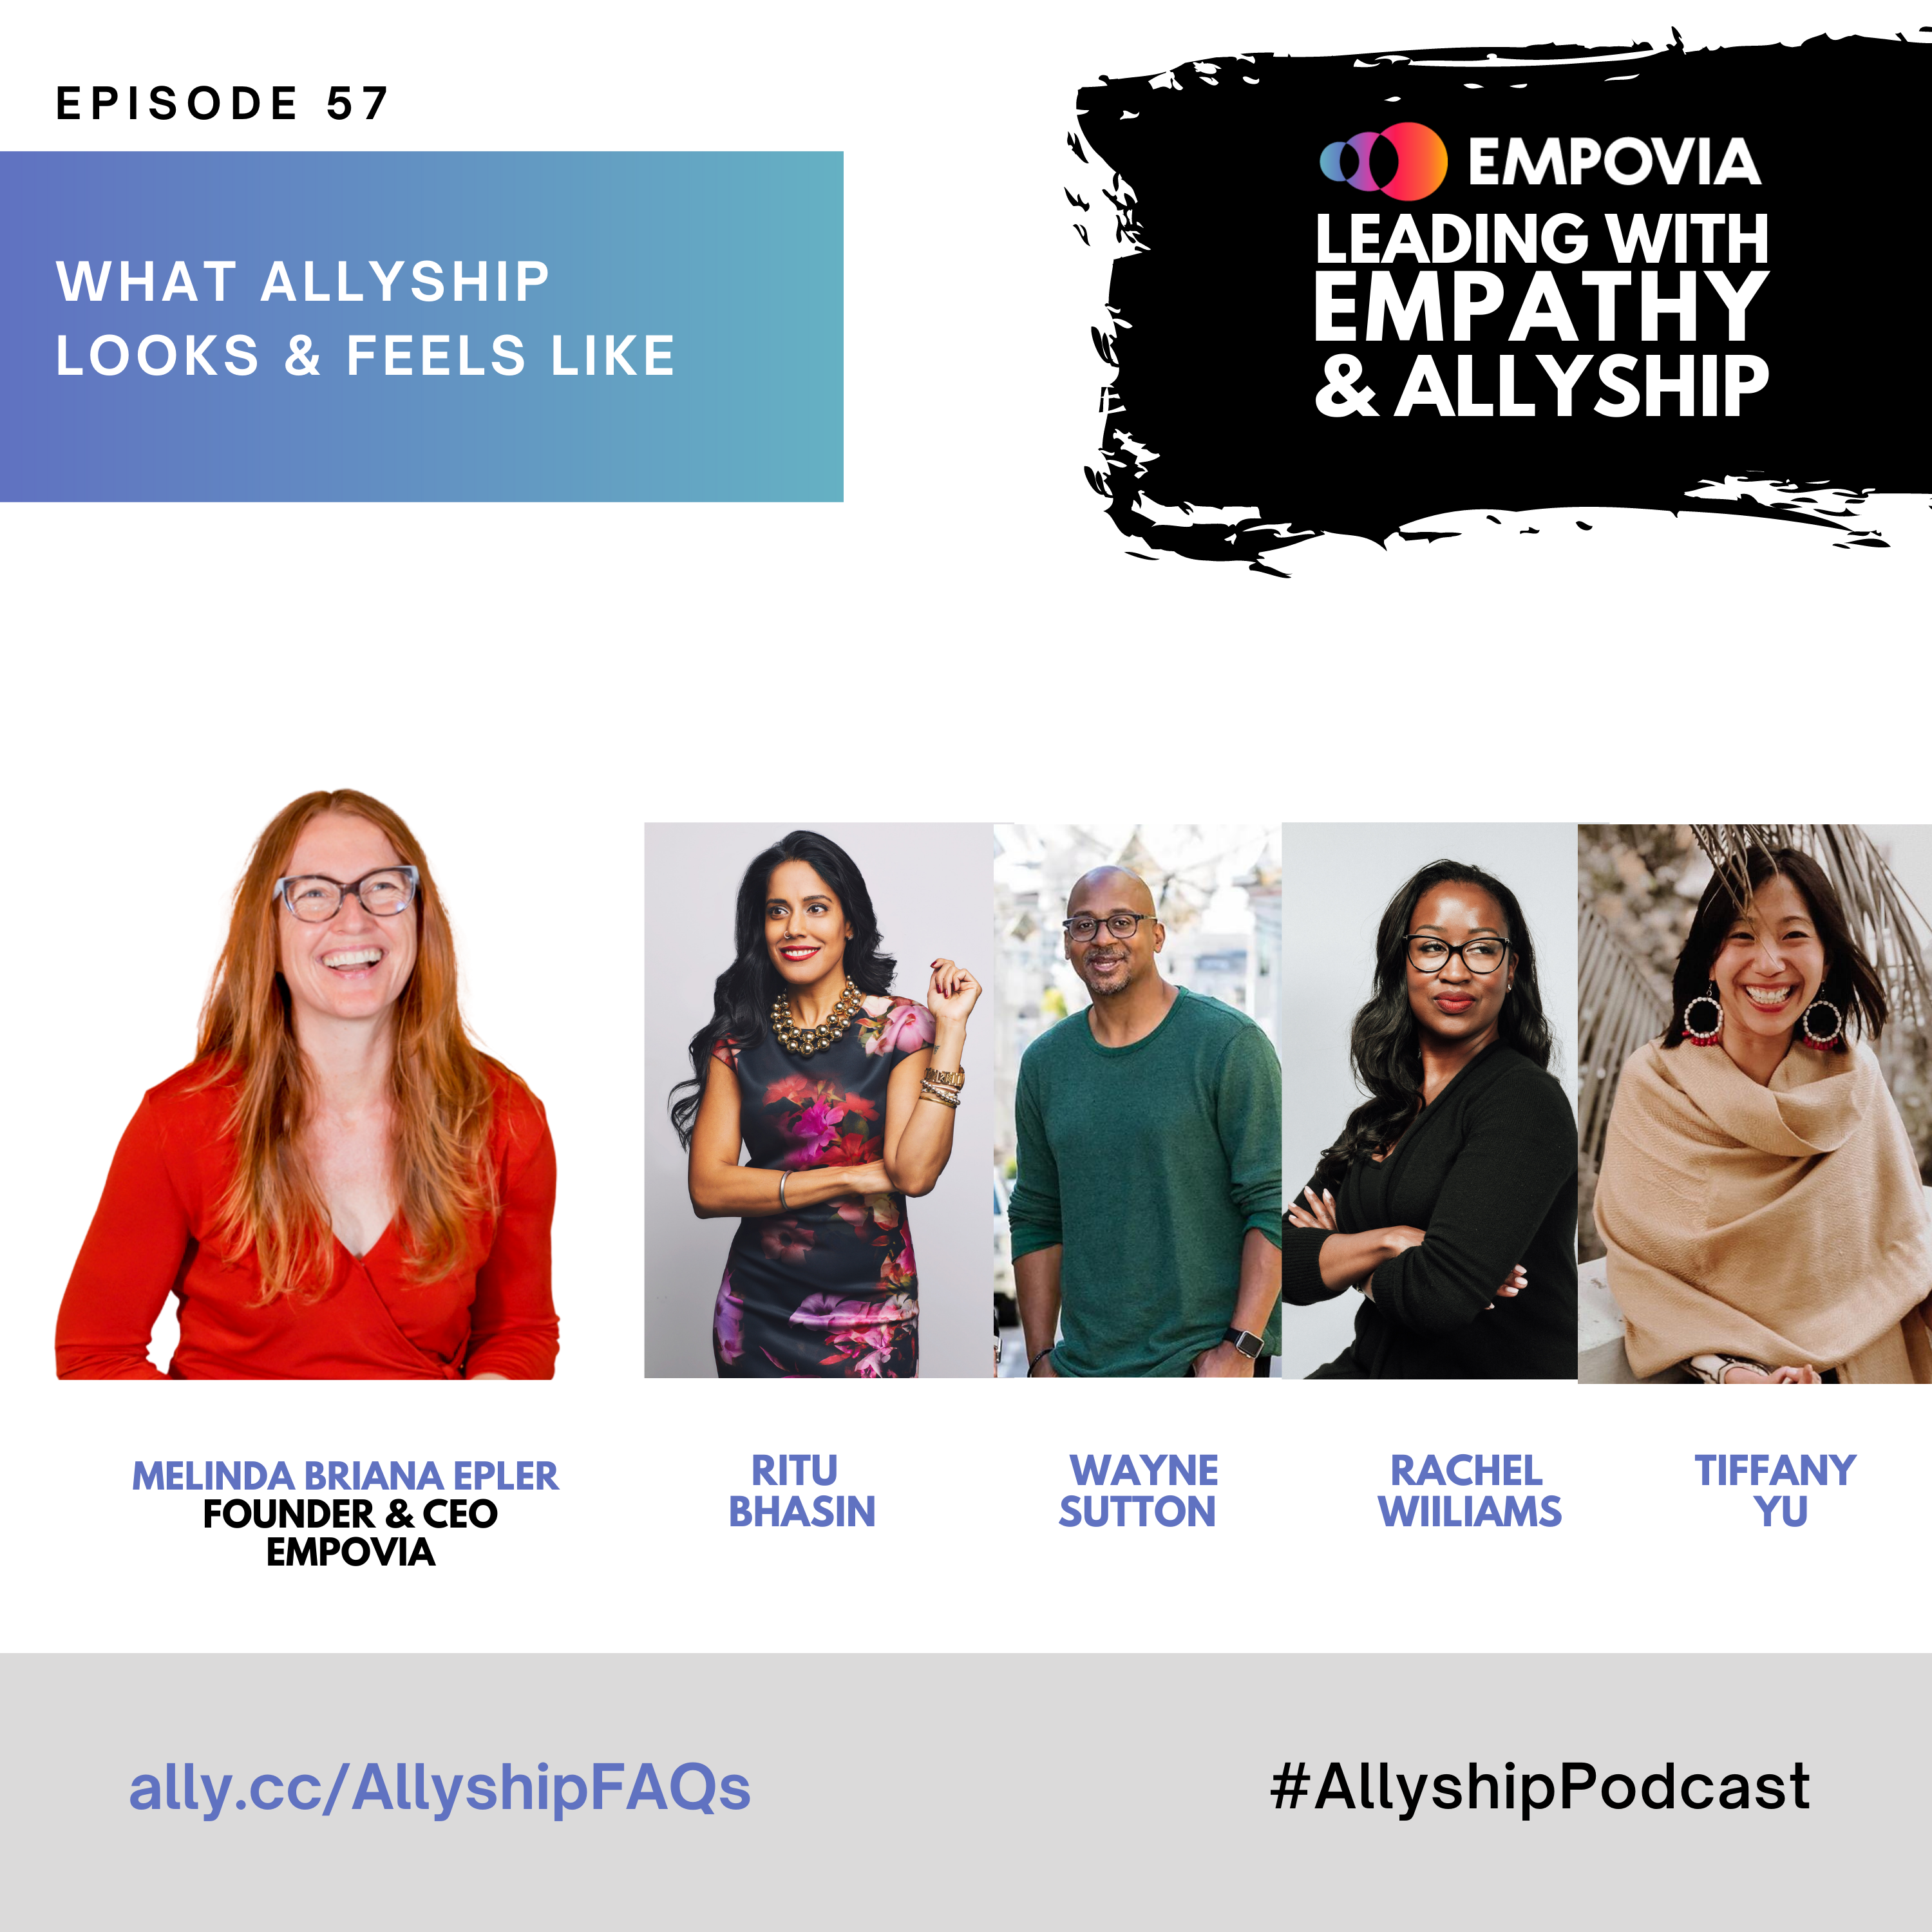 Leading With Empathy & Allyship promo with the Empovia logo and photos of Melinda Briana Epler, a White woman with red hair, glasses, and orange shirt holding a white mug behind a laptop; Ritu Basin, a Punjabi Indian-Canadian woman with long black hair and beaded necklace; Wayne Sutton, a Black man with a goatee, glasses, and a dark grey button-down; Rachel Williams, a Black woman with black hair and a black blazer; and Tiffany Yu, an Asian woman with brown hair and beige shawl.